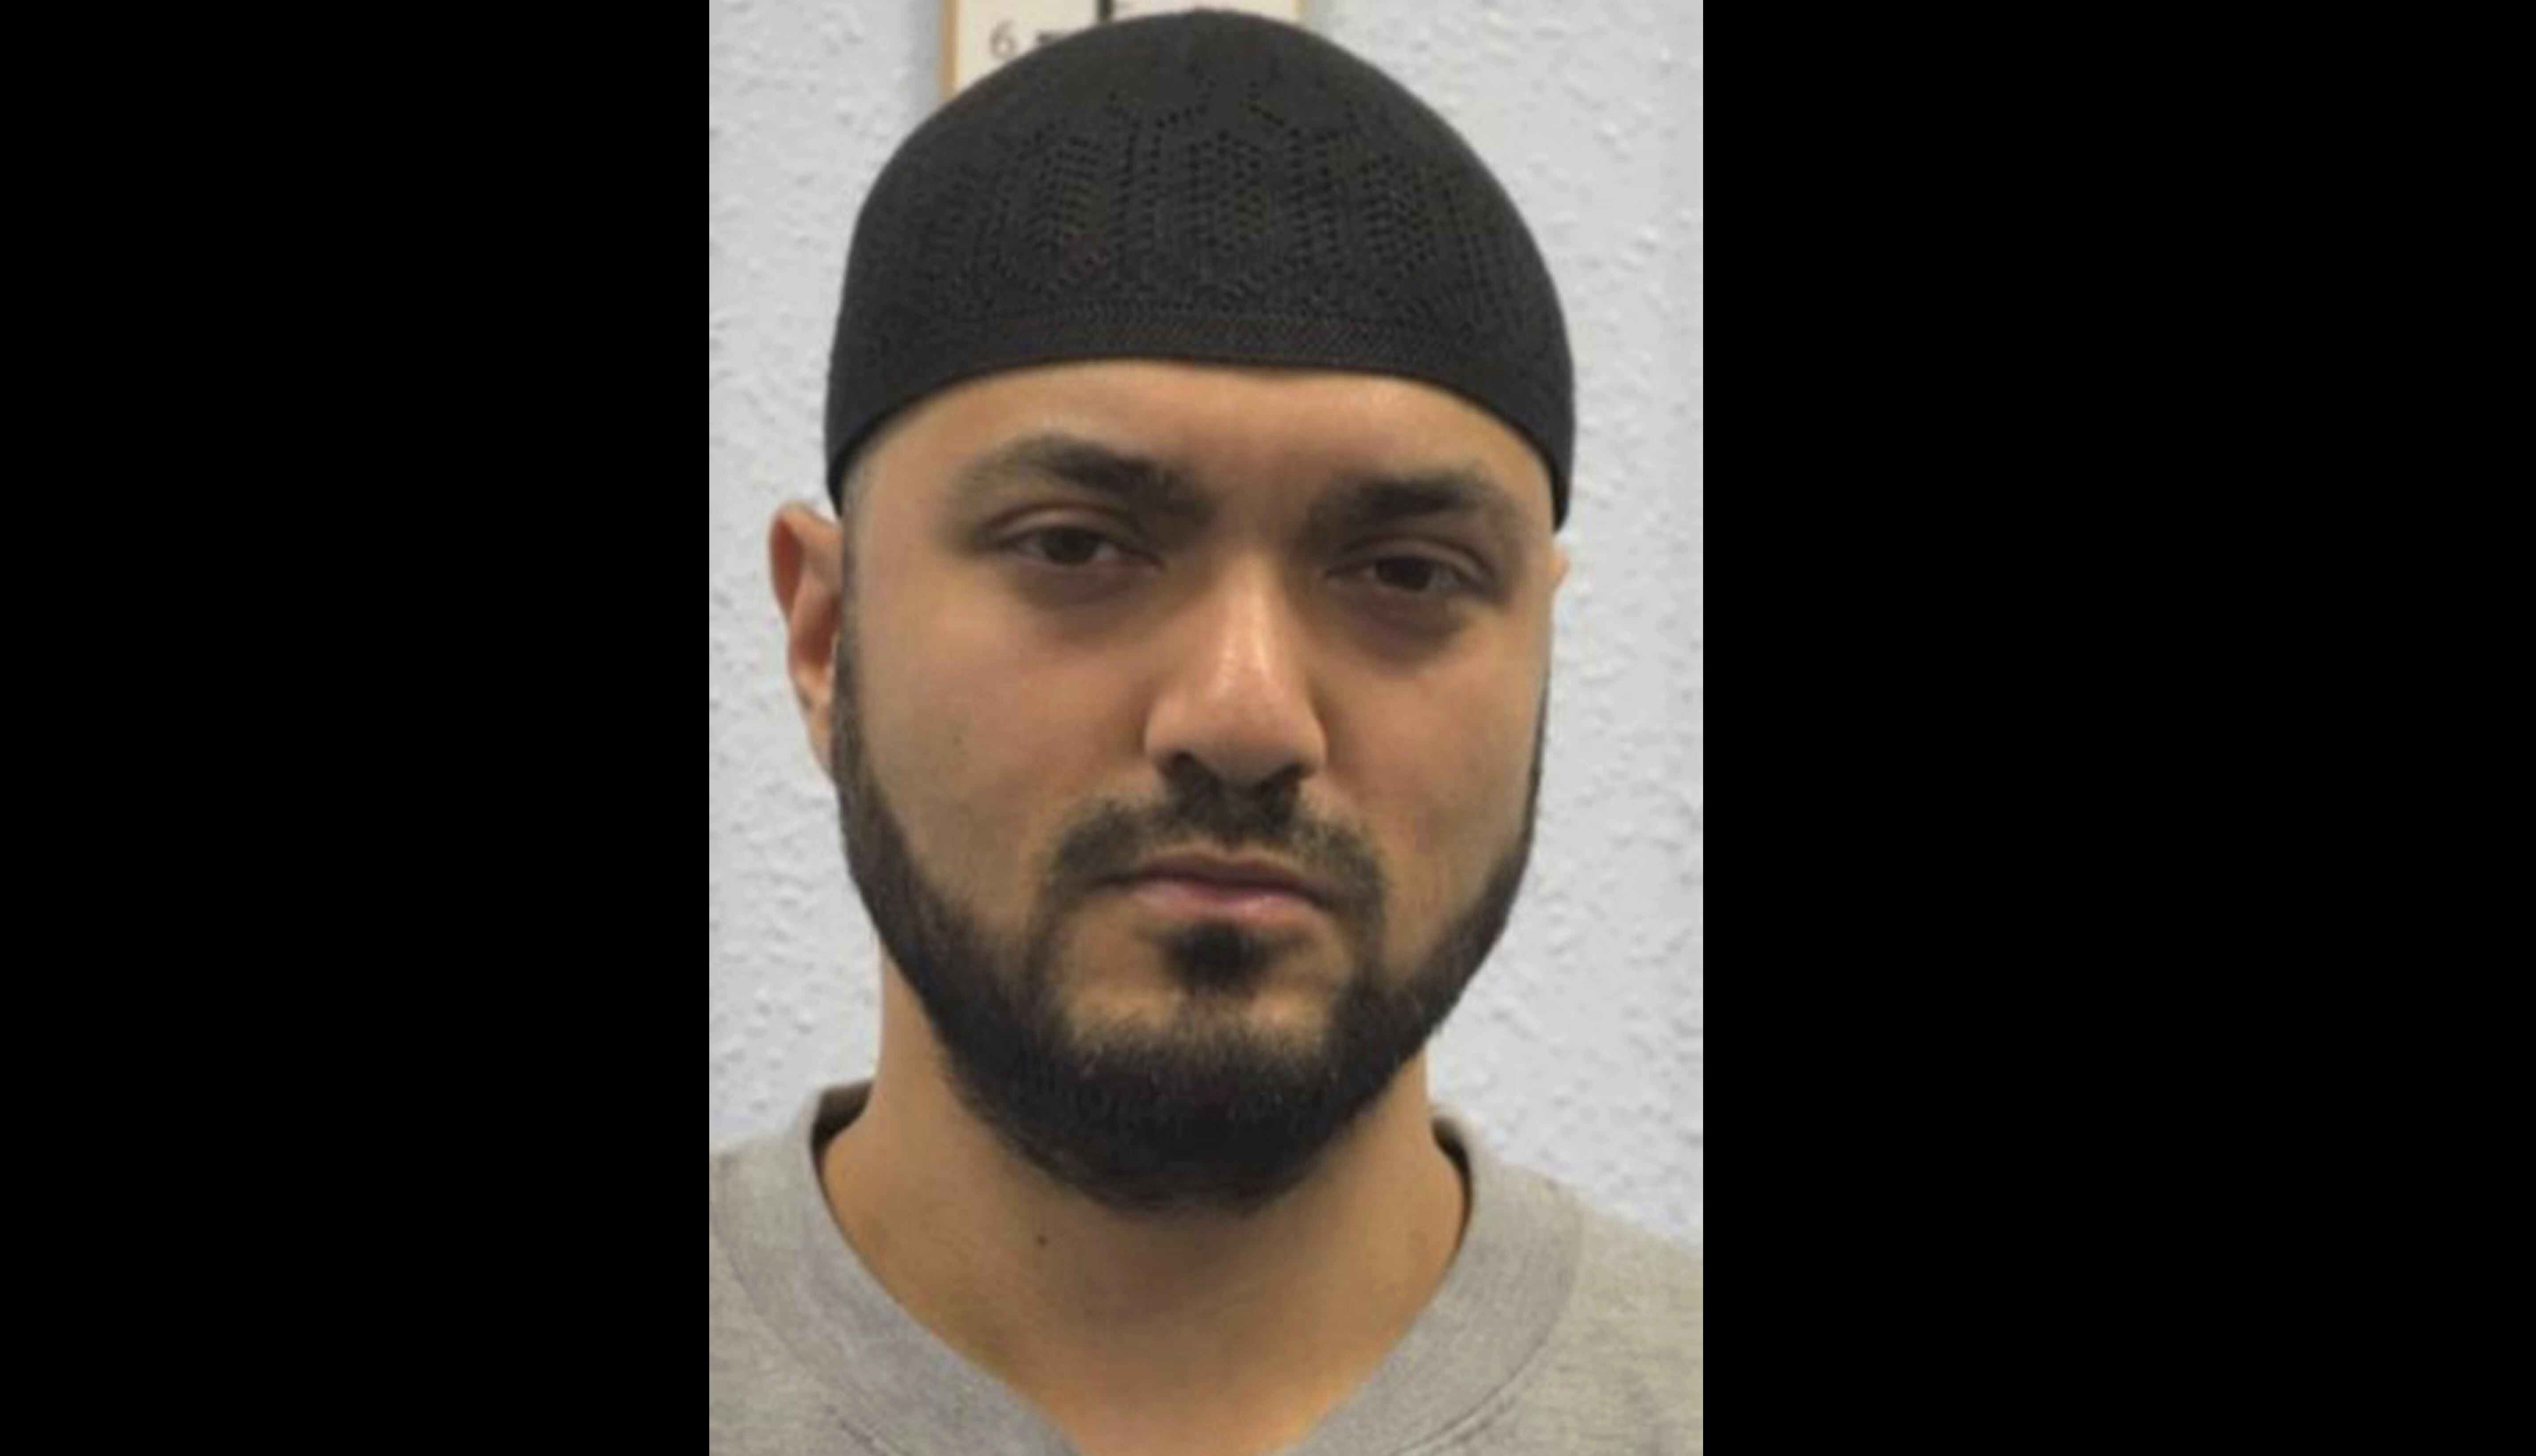 Mohiussunnath Chowdhury who has been convicted of planning a terror attack at busy London tourist hotspots. 